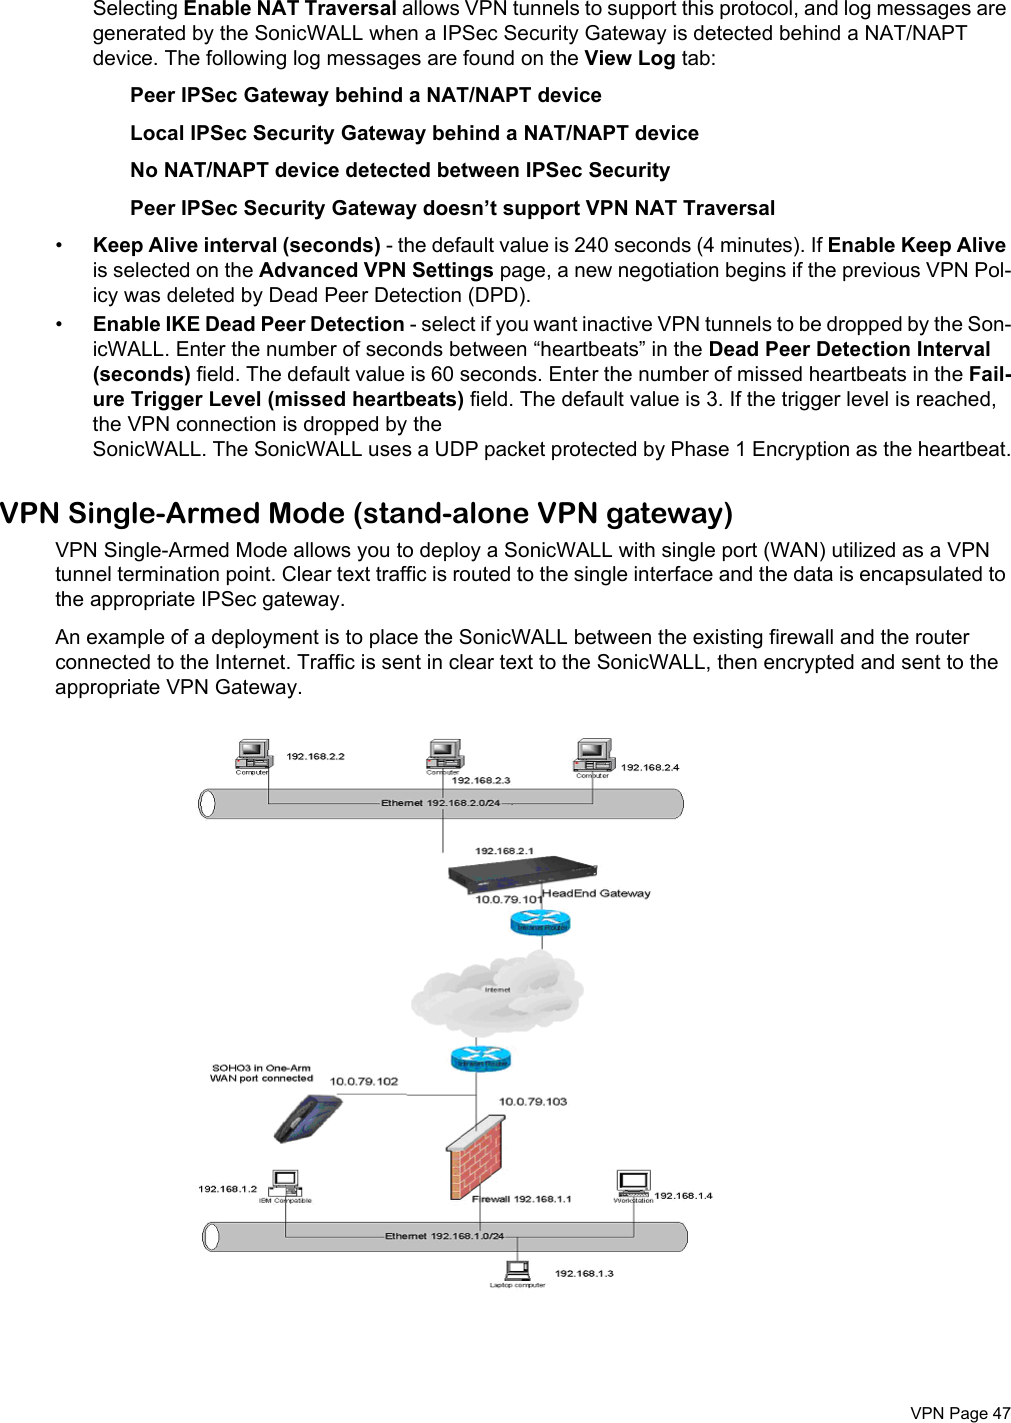  VPN Page 47Selecting Enable NAT Traversal allows VPN tunnels to support this protocol, and log messages are generated by the SonicWALL when a IPSec Security Gateway is detected behind a NAT/NAPT device. The following log messages are found on the View Log tab:Peer IPSec Gateway behind a NAT/NAPT device Local IPSec Security Gateway behind a NAT/NAPT device No NAT/NAPT device detected between IPSec Security Peer IPSec Security Gateway doesn’t support VPN NAT Traversal •Keep Alive interval (seconds) - the default value is 240 seconds (4 minutes). If Enable Keep Alive is selected on the Advanced VPN Settings page, a new negotiation begins if the previous VPN Pol-icy was deleted by Dead Peer Detection (DPD). •Enable IKE Dead Peer Detection - select if you want inactive VPN tunnels to be dropped by the Son-icWALL. Enter the number of seconds between “heartbeats” in the Dead Peer Detection Interval (seconds) field. The default value is 60 seconds. Enter the number of missed heartbeats in the Fail-ure Trigger Level (missed heartbeats) field. The default value is 3. If the trigger level is reached, the VPN connection is dropped by the SonicWALL. The SonicWALL uses a UDP packet protected by Phase 1 Encryption as the heartbeat.VPN Single-Armed Mode (stand-alone VPN gateway)VPN Single-Armed Mode allows you to deploy a SonicWALL with single port (WAN) utilized as a VPN tunnel termination point. Clear text traffic is routed to the single interface and the data is encapsulated to the appropriate IPSec gateway. An example of a deployment is to place the SonicWALL between the existing firewall and the router connected to the Internet. Traffic is sent in clear text to the SonicWALL, then encrypted and sent to the appropriate VPN Gateway. 